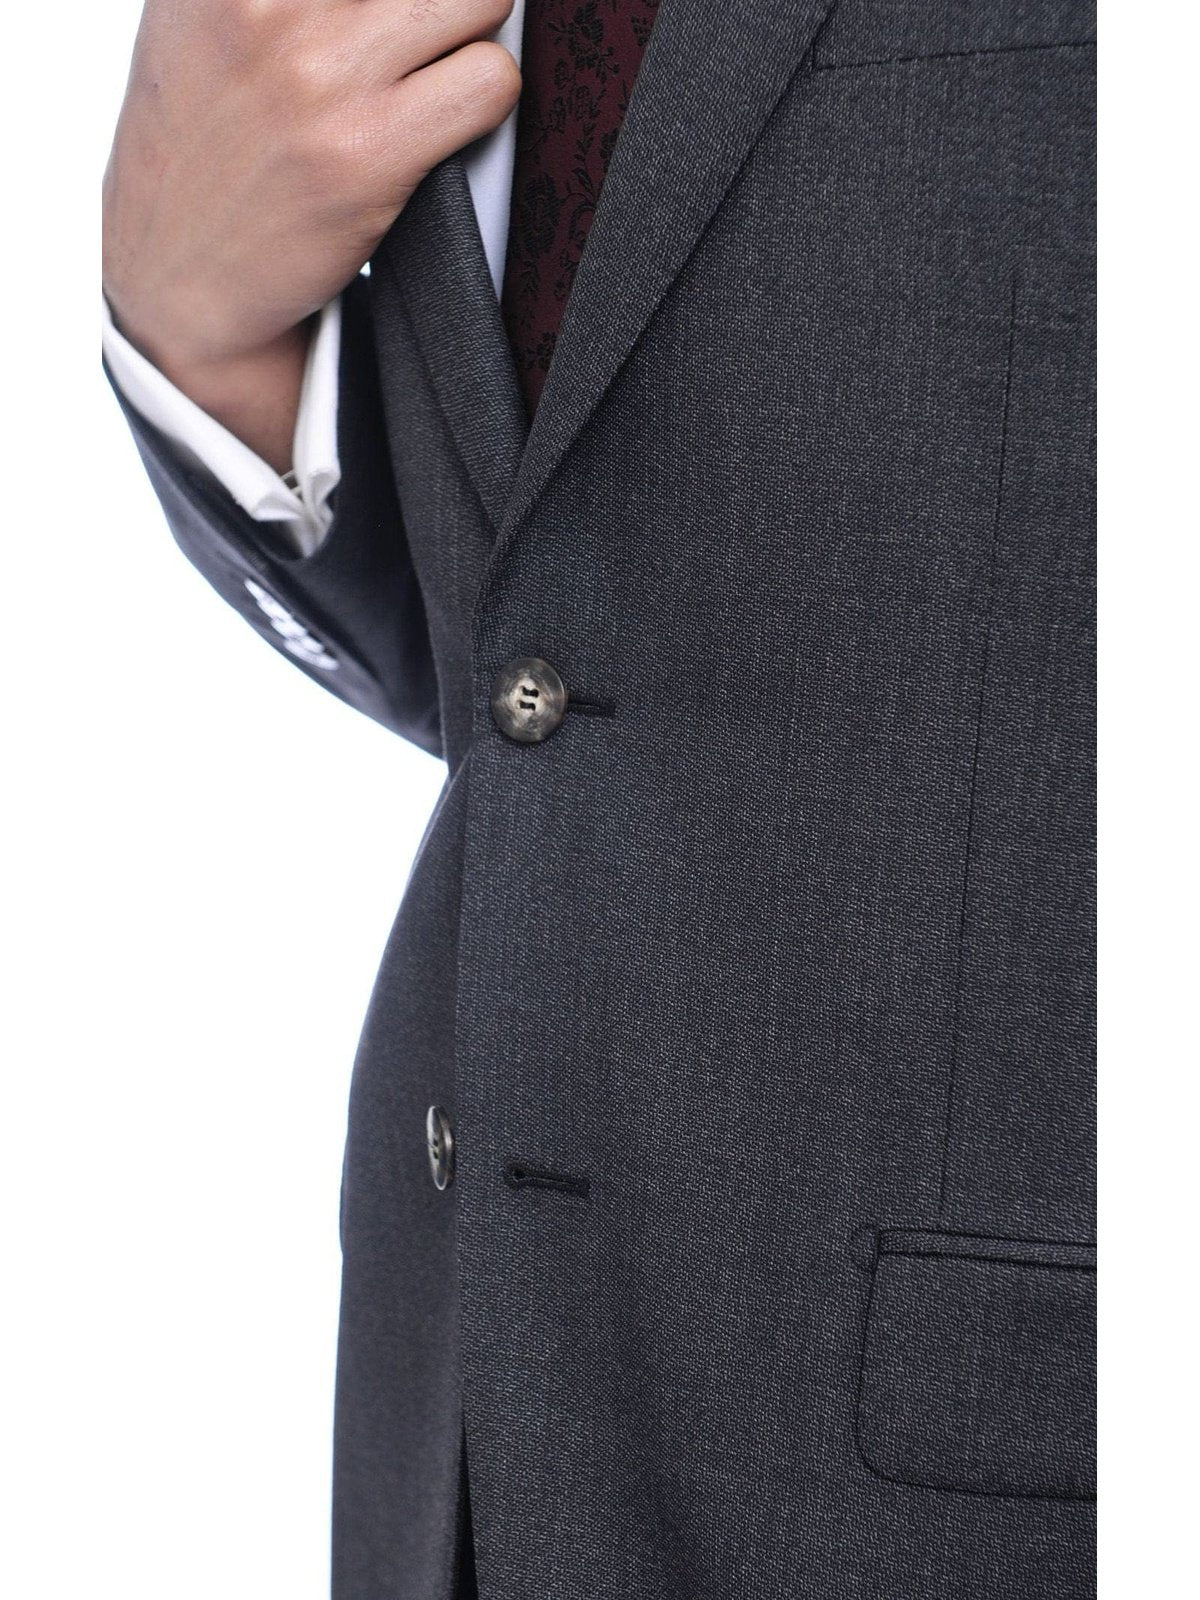 Napoli TWO PIECE SUITS Napoli Classic Fit Textured Charcoal Gray Two Button Half Canvassed Wool Suit